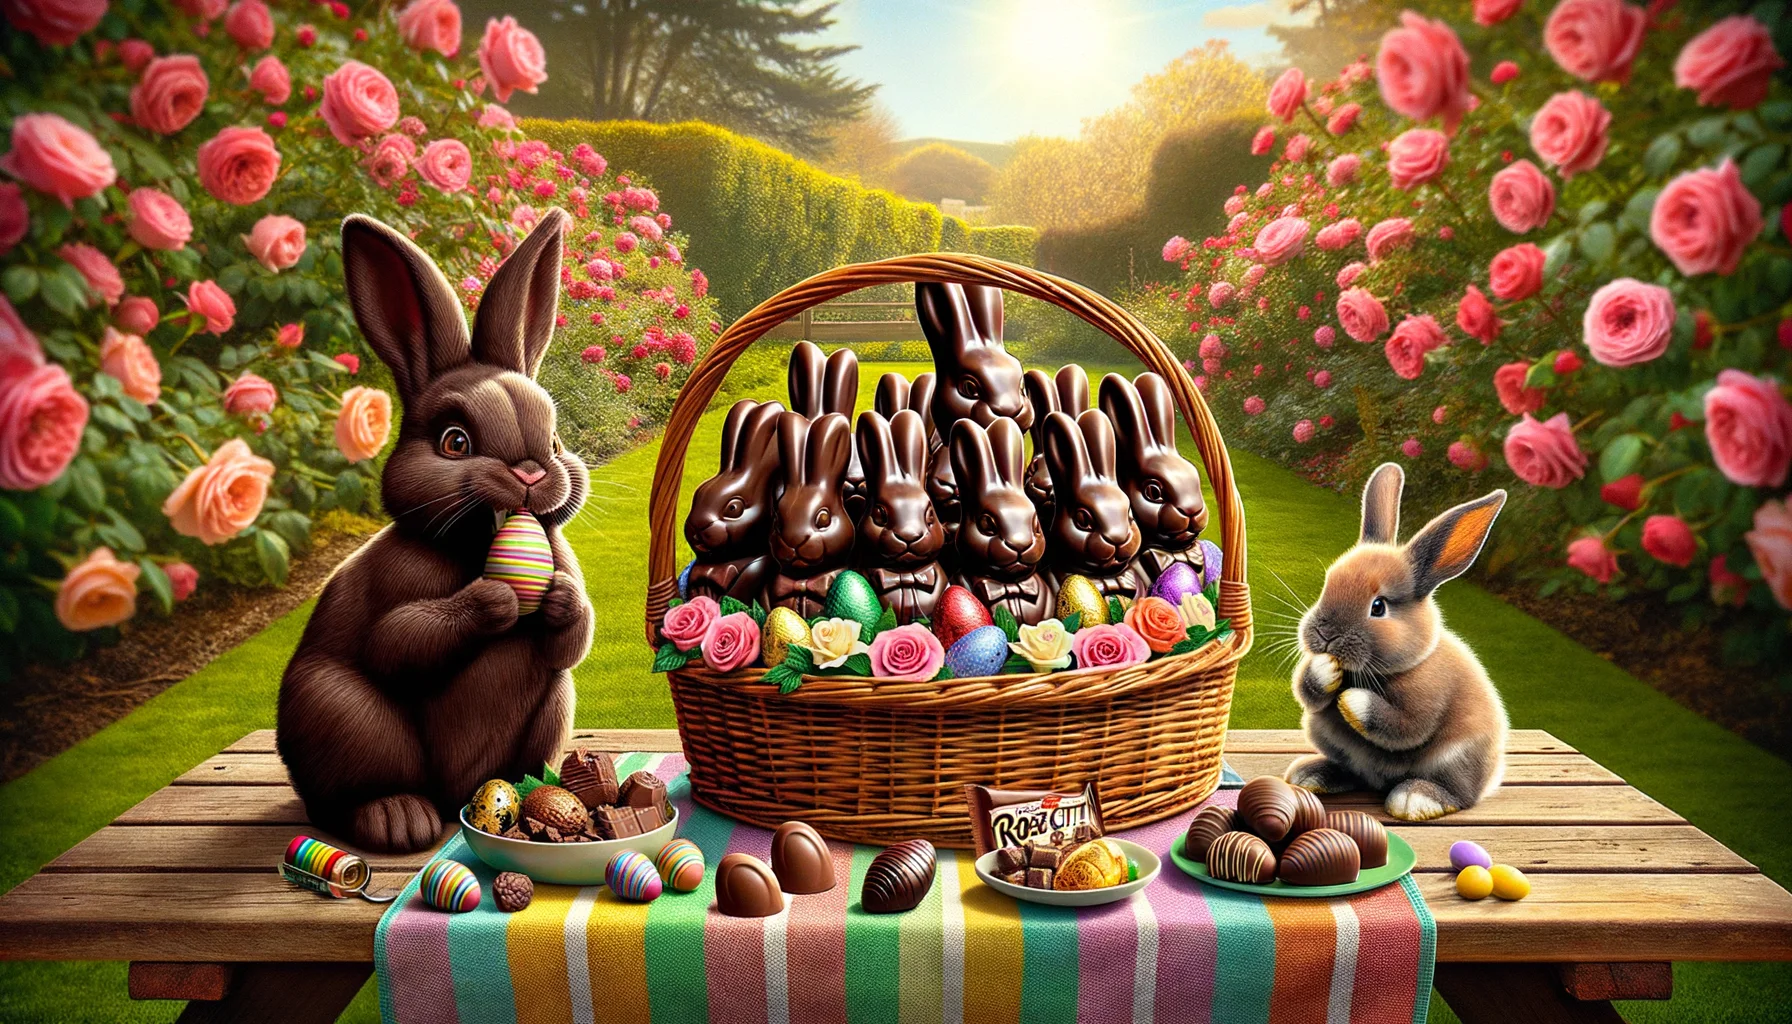 Create a humorous, realistic image of a 'Rose City Vegan Chocolate Easter Bunny Basket'. Picture a sunlit picnic table spread with a colorful Easter-themed mat. In the center sits the Rose City Vegan Chocolate Easter Bunny Basket, teeming with delicious bunnies made of dark, glossy vegan chocolate, and surrounded by a collection of smaller vegan treats. A fluffy bunny is nearby, comically cocking its head as if surprised by its 'chocolate twin' in the basket. Blooming roses provide the backdrop, fading into a soft-focus background that complements the vibrant colors of the basket and its contents.